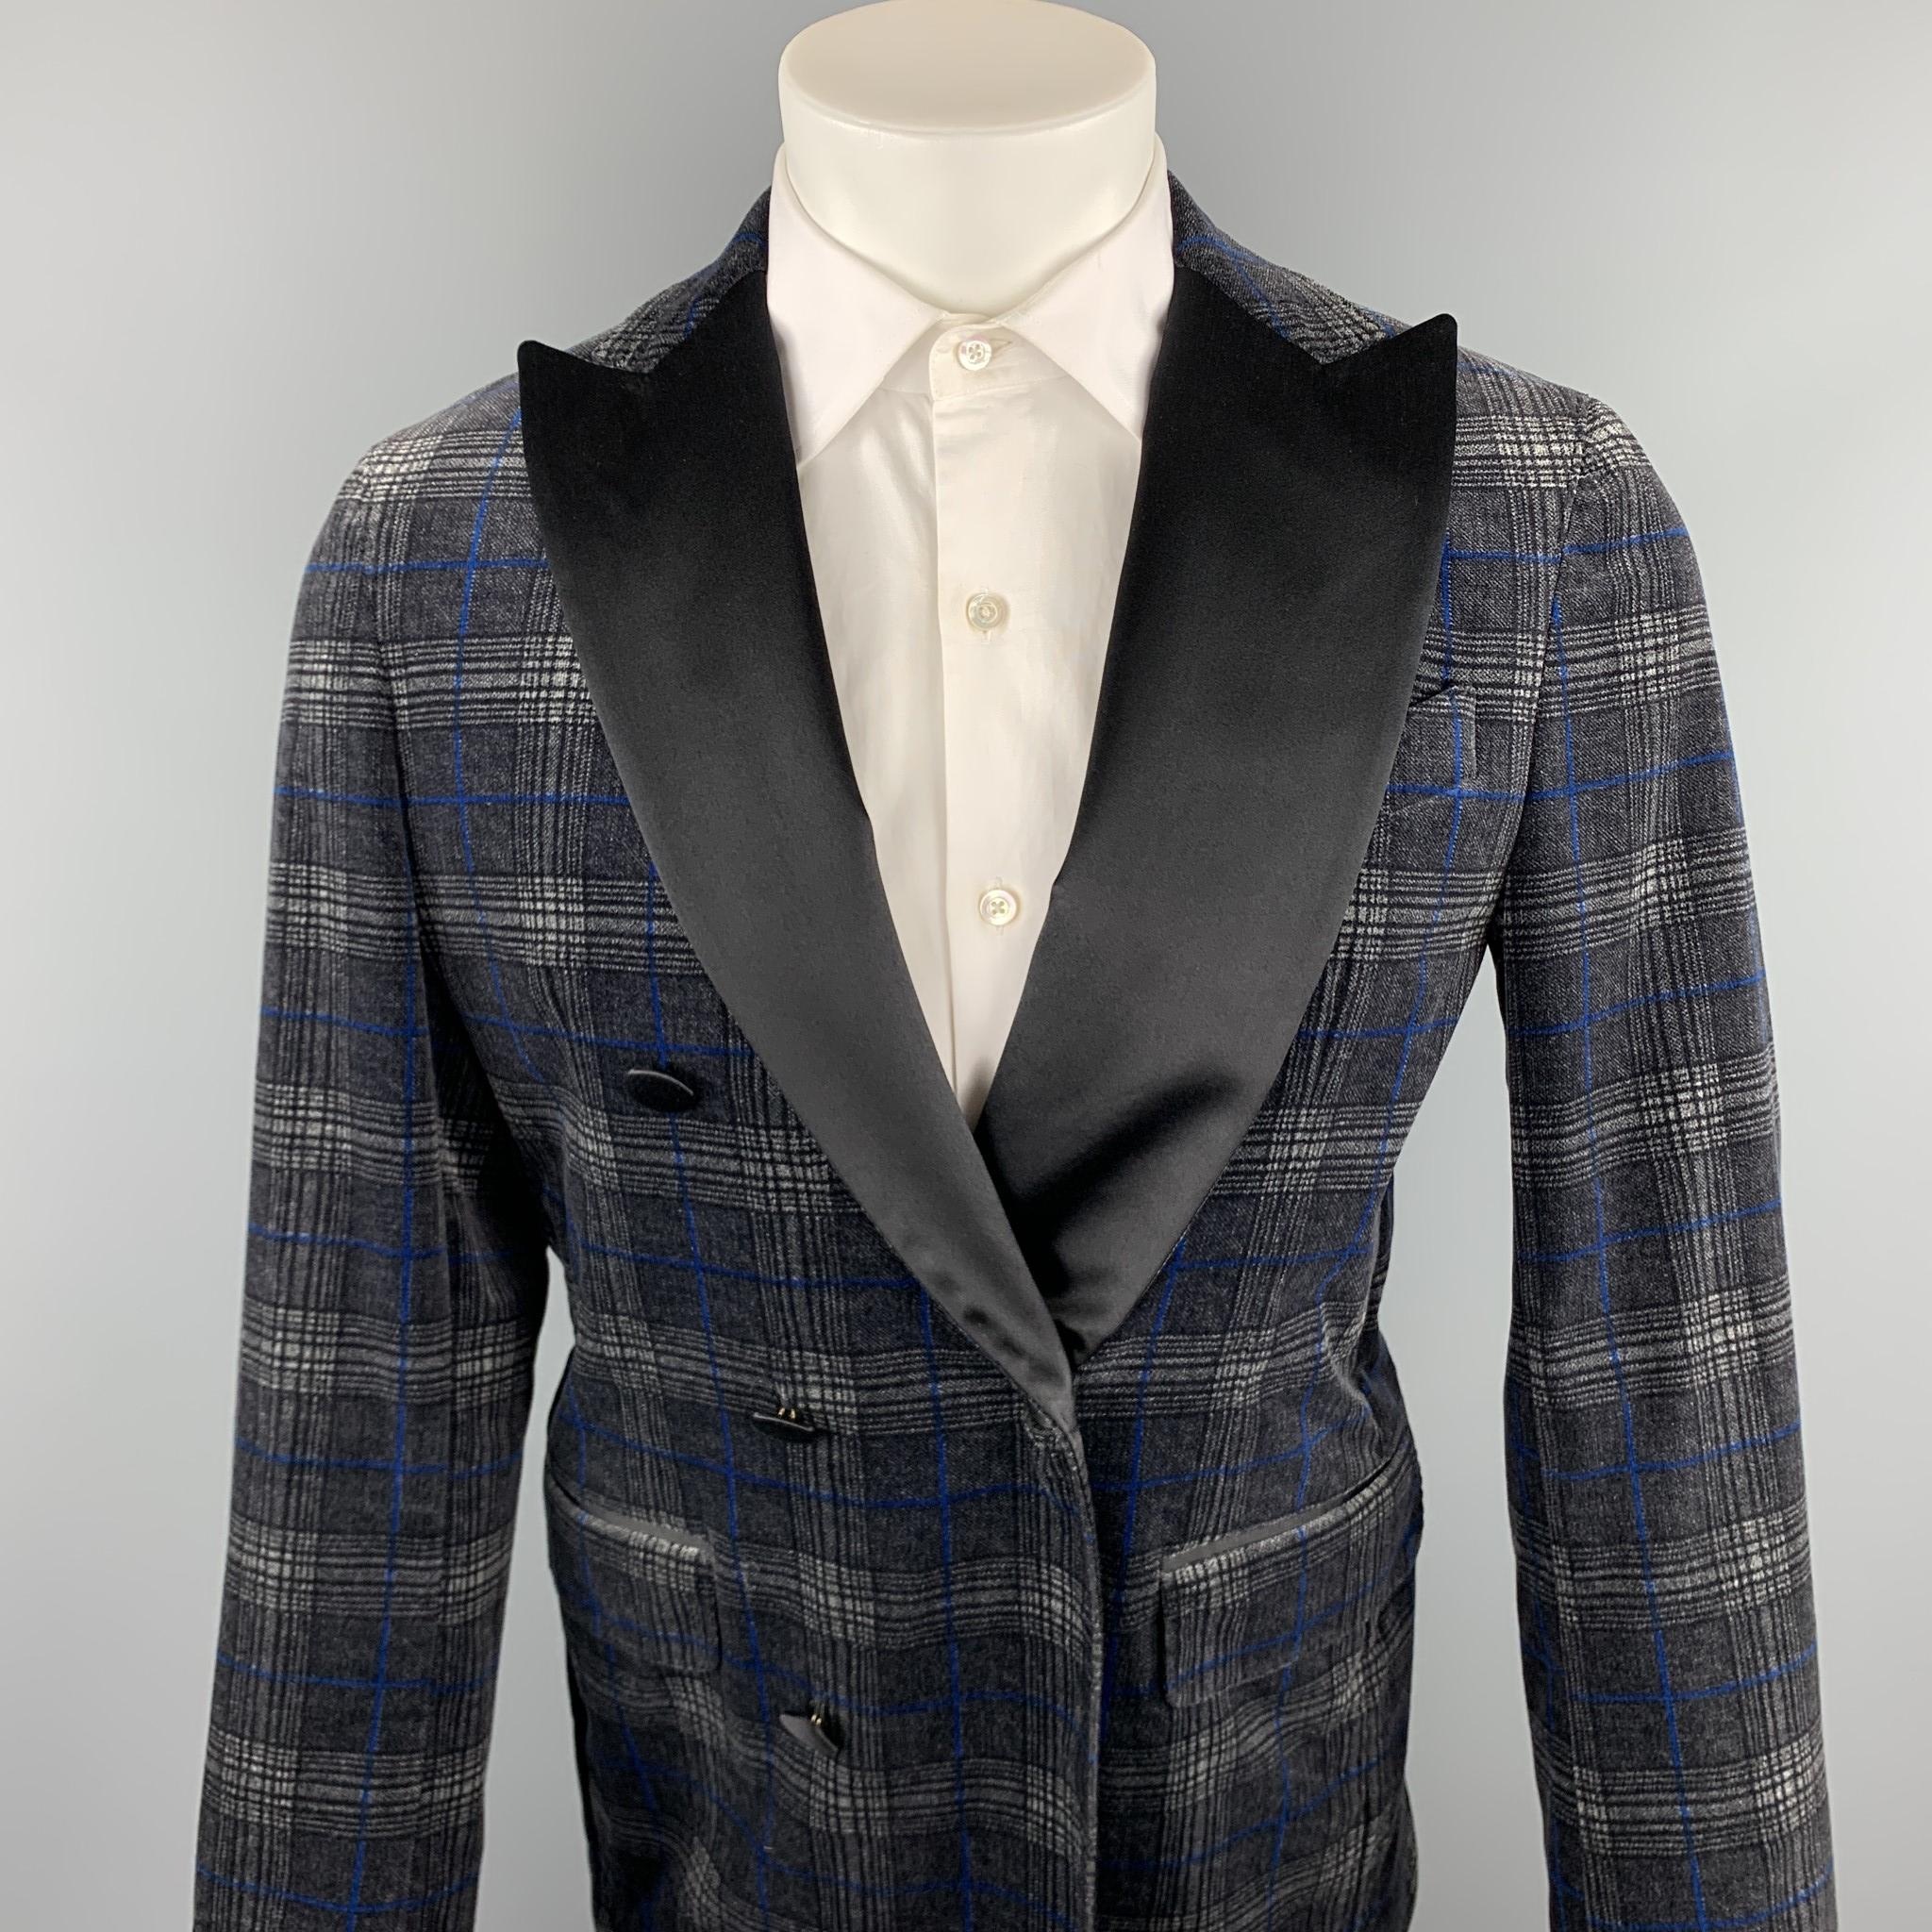 DSQUARED2 sport coat comes in a black & grey plaid velvet featuring a peak lapel, flap pockets, and a double breasted closure. Made in Italy.

Very Good Pre-Owned Condition.
Marked: IT 50

Measurements:

Shoulder: 17.5 in. 
Chest: 38 in. 
Sleeve: 26